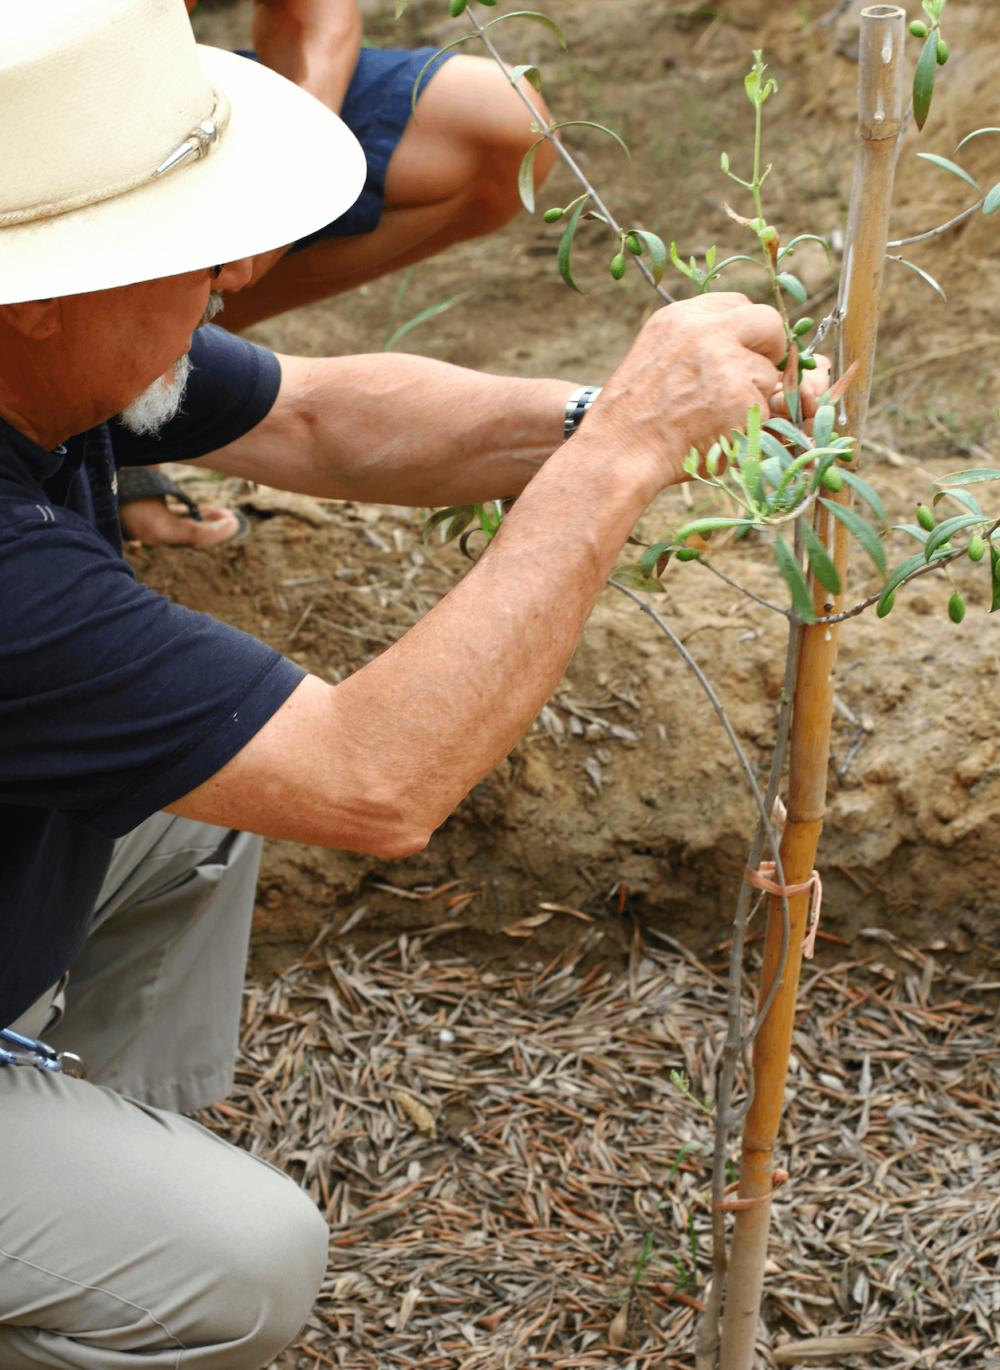 Would you like to know where Lifefood’s raw olives come from?